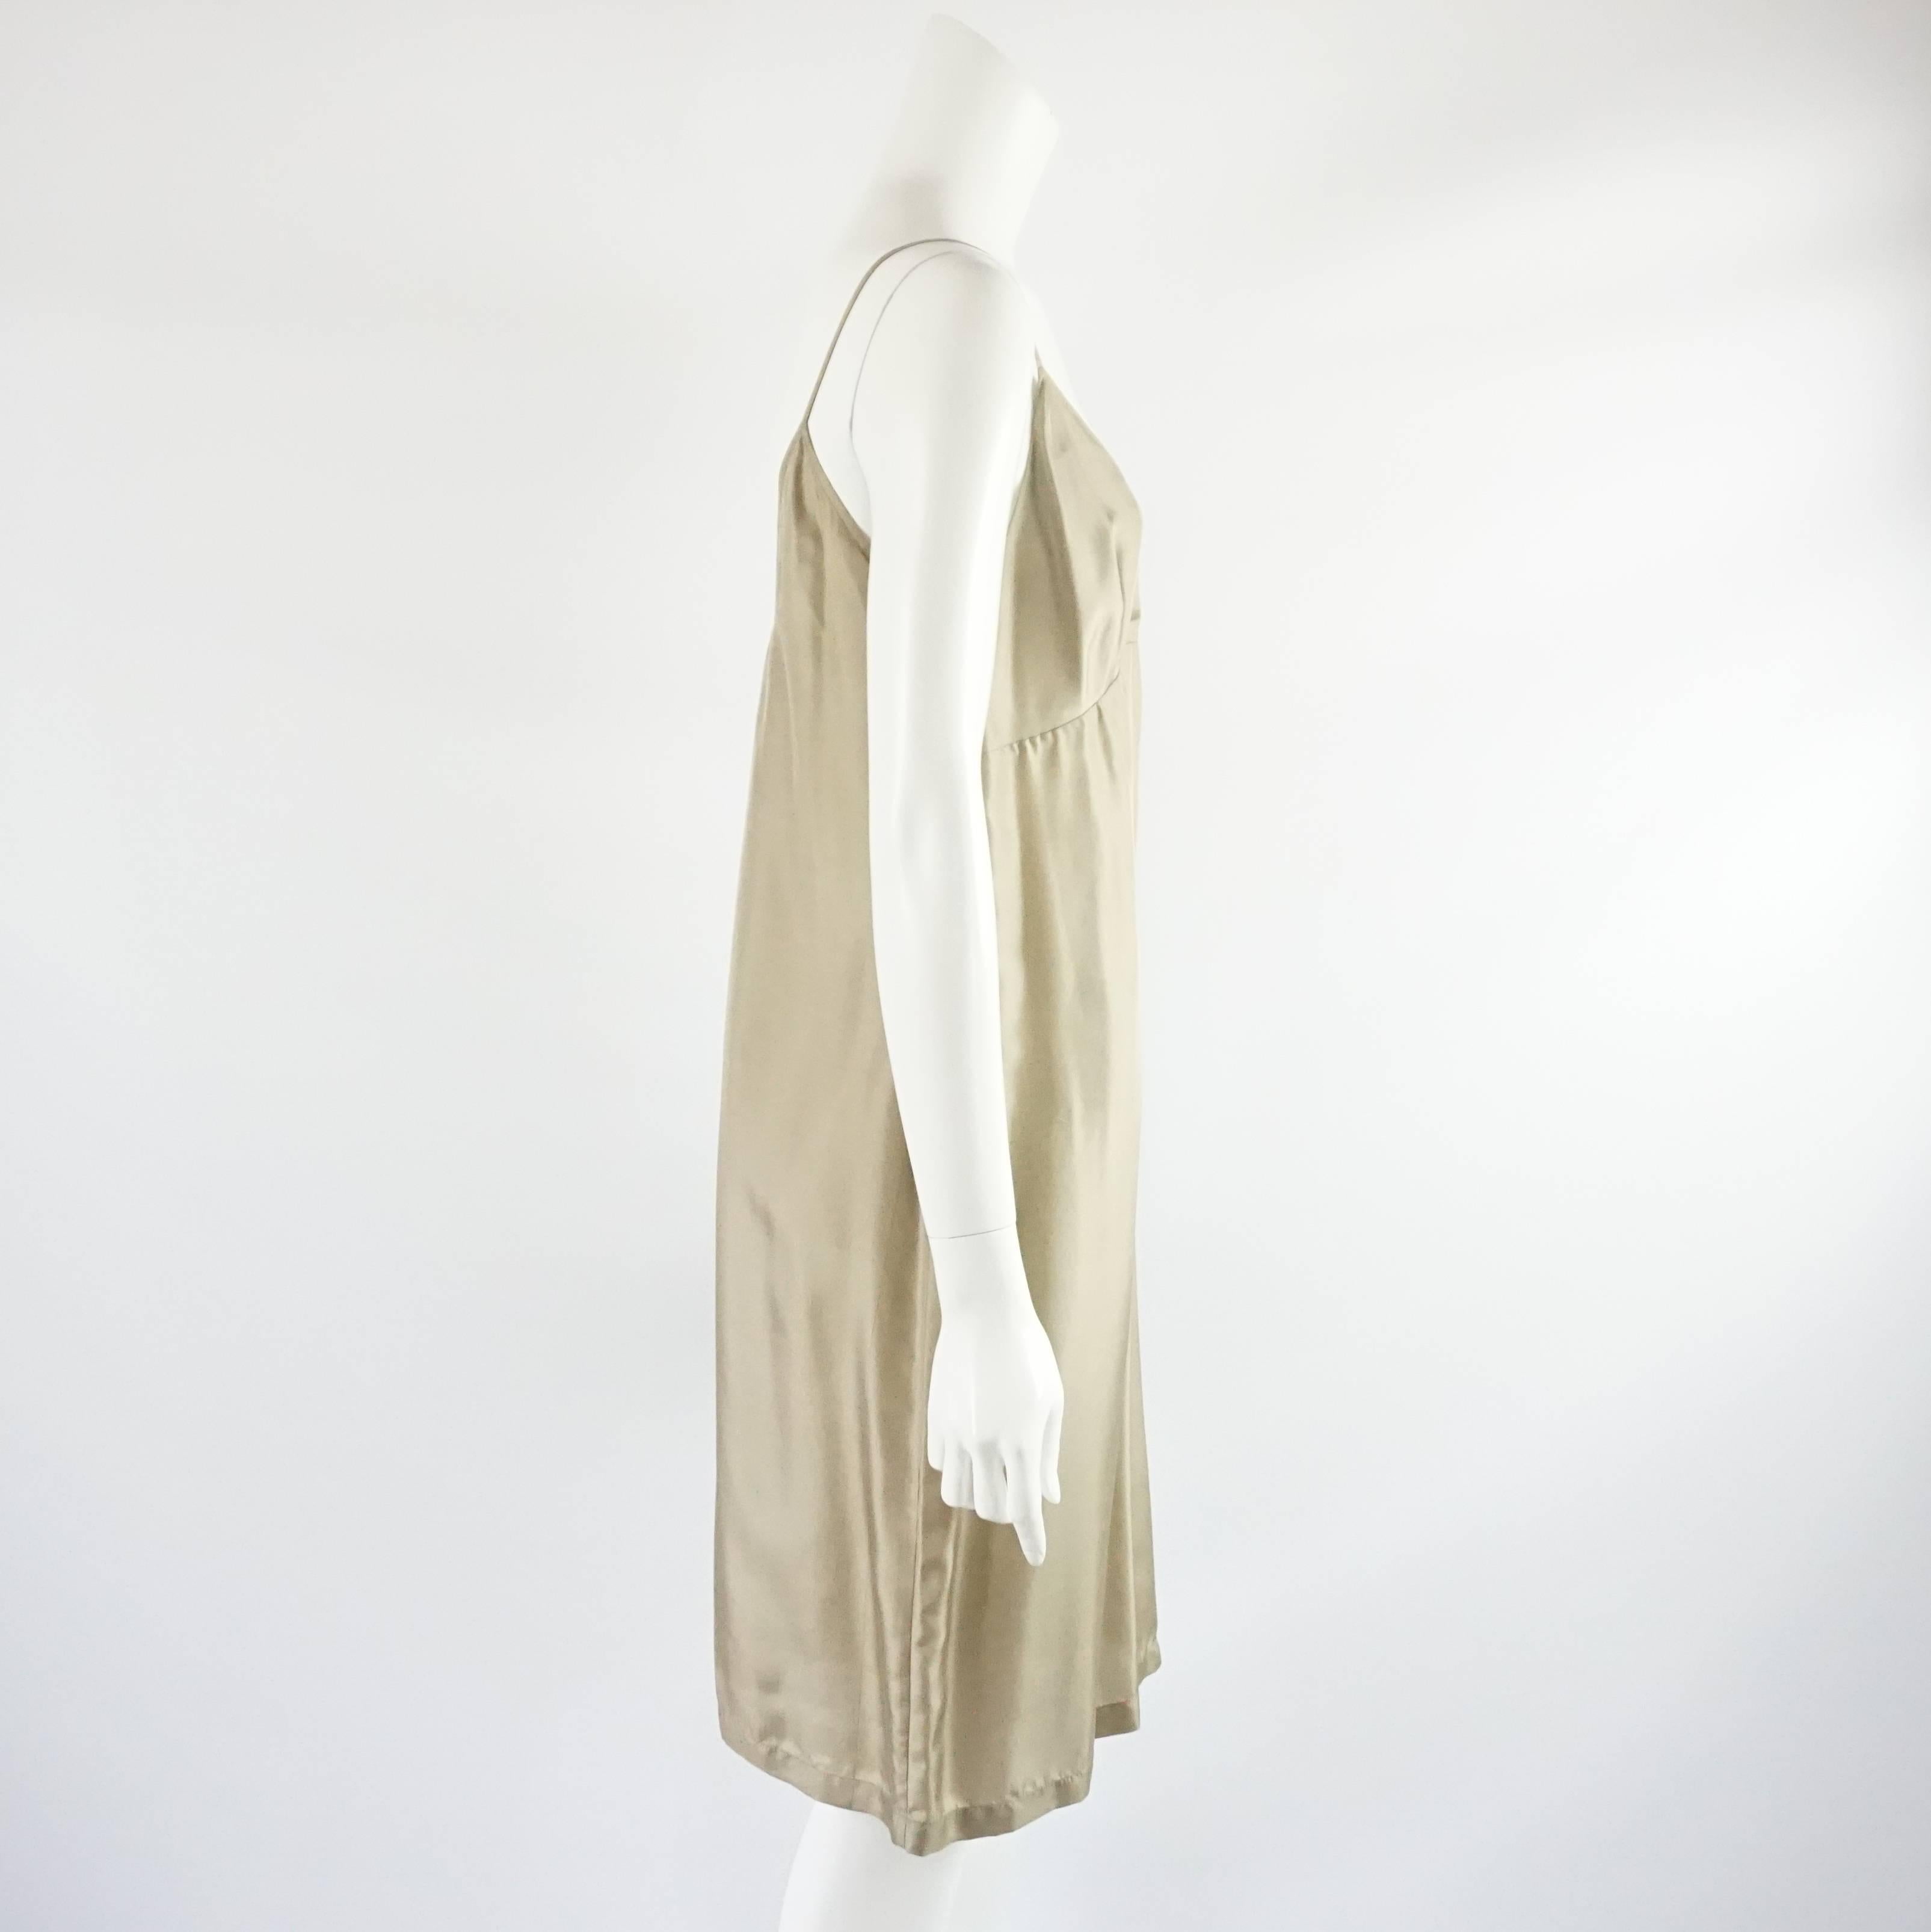 This Dries Van Noten slip dress is taupe silk. It has spaghetti straps and a v-neck. This dress is in excellent condition.

Measurements
Bust: 34